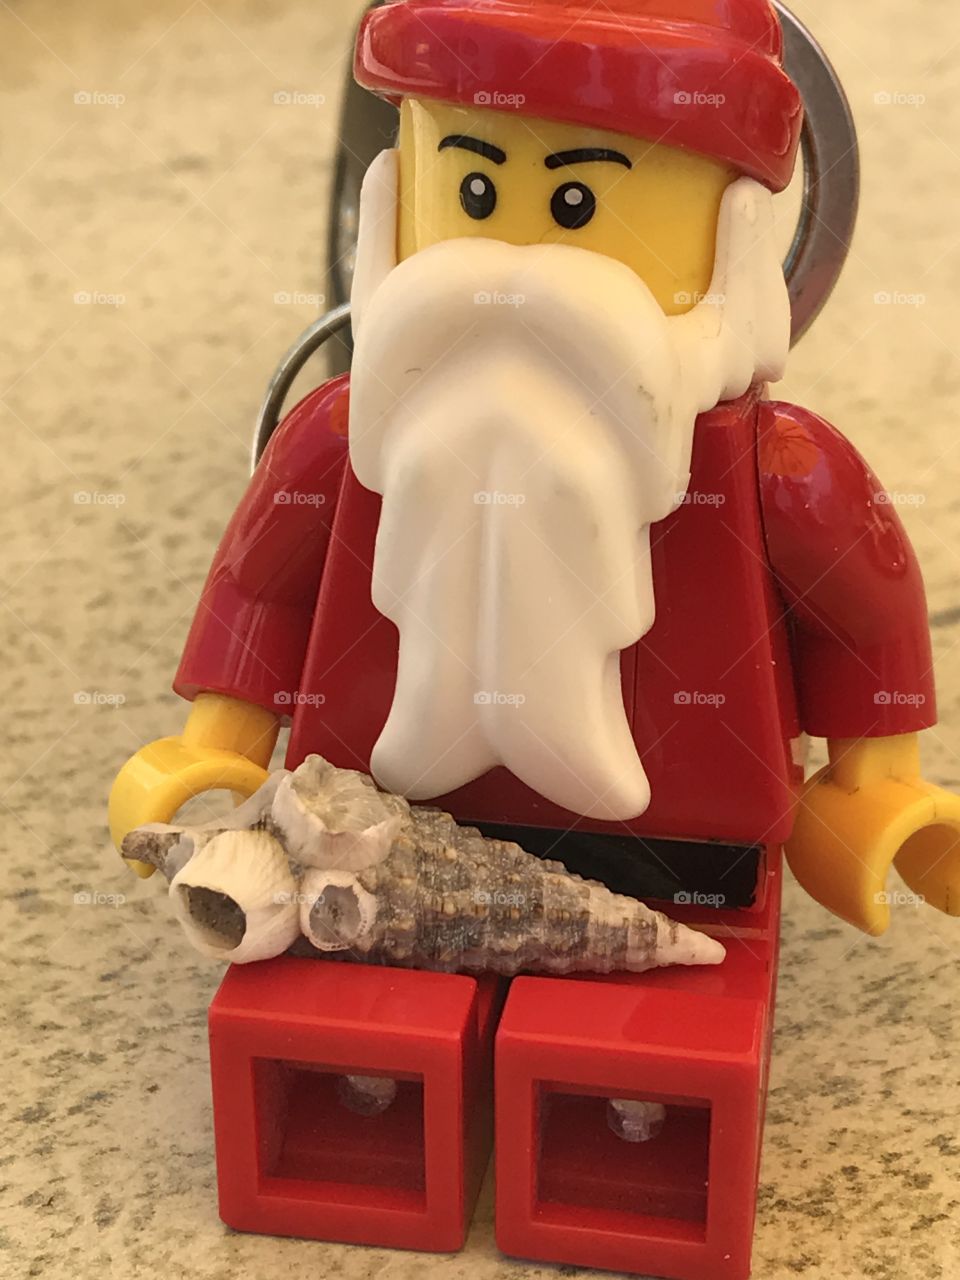 Lego and shell on the beach